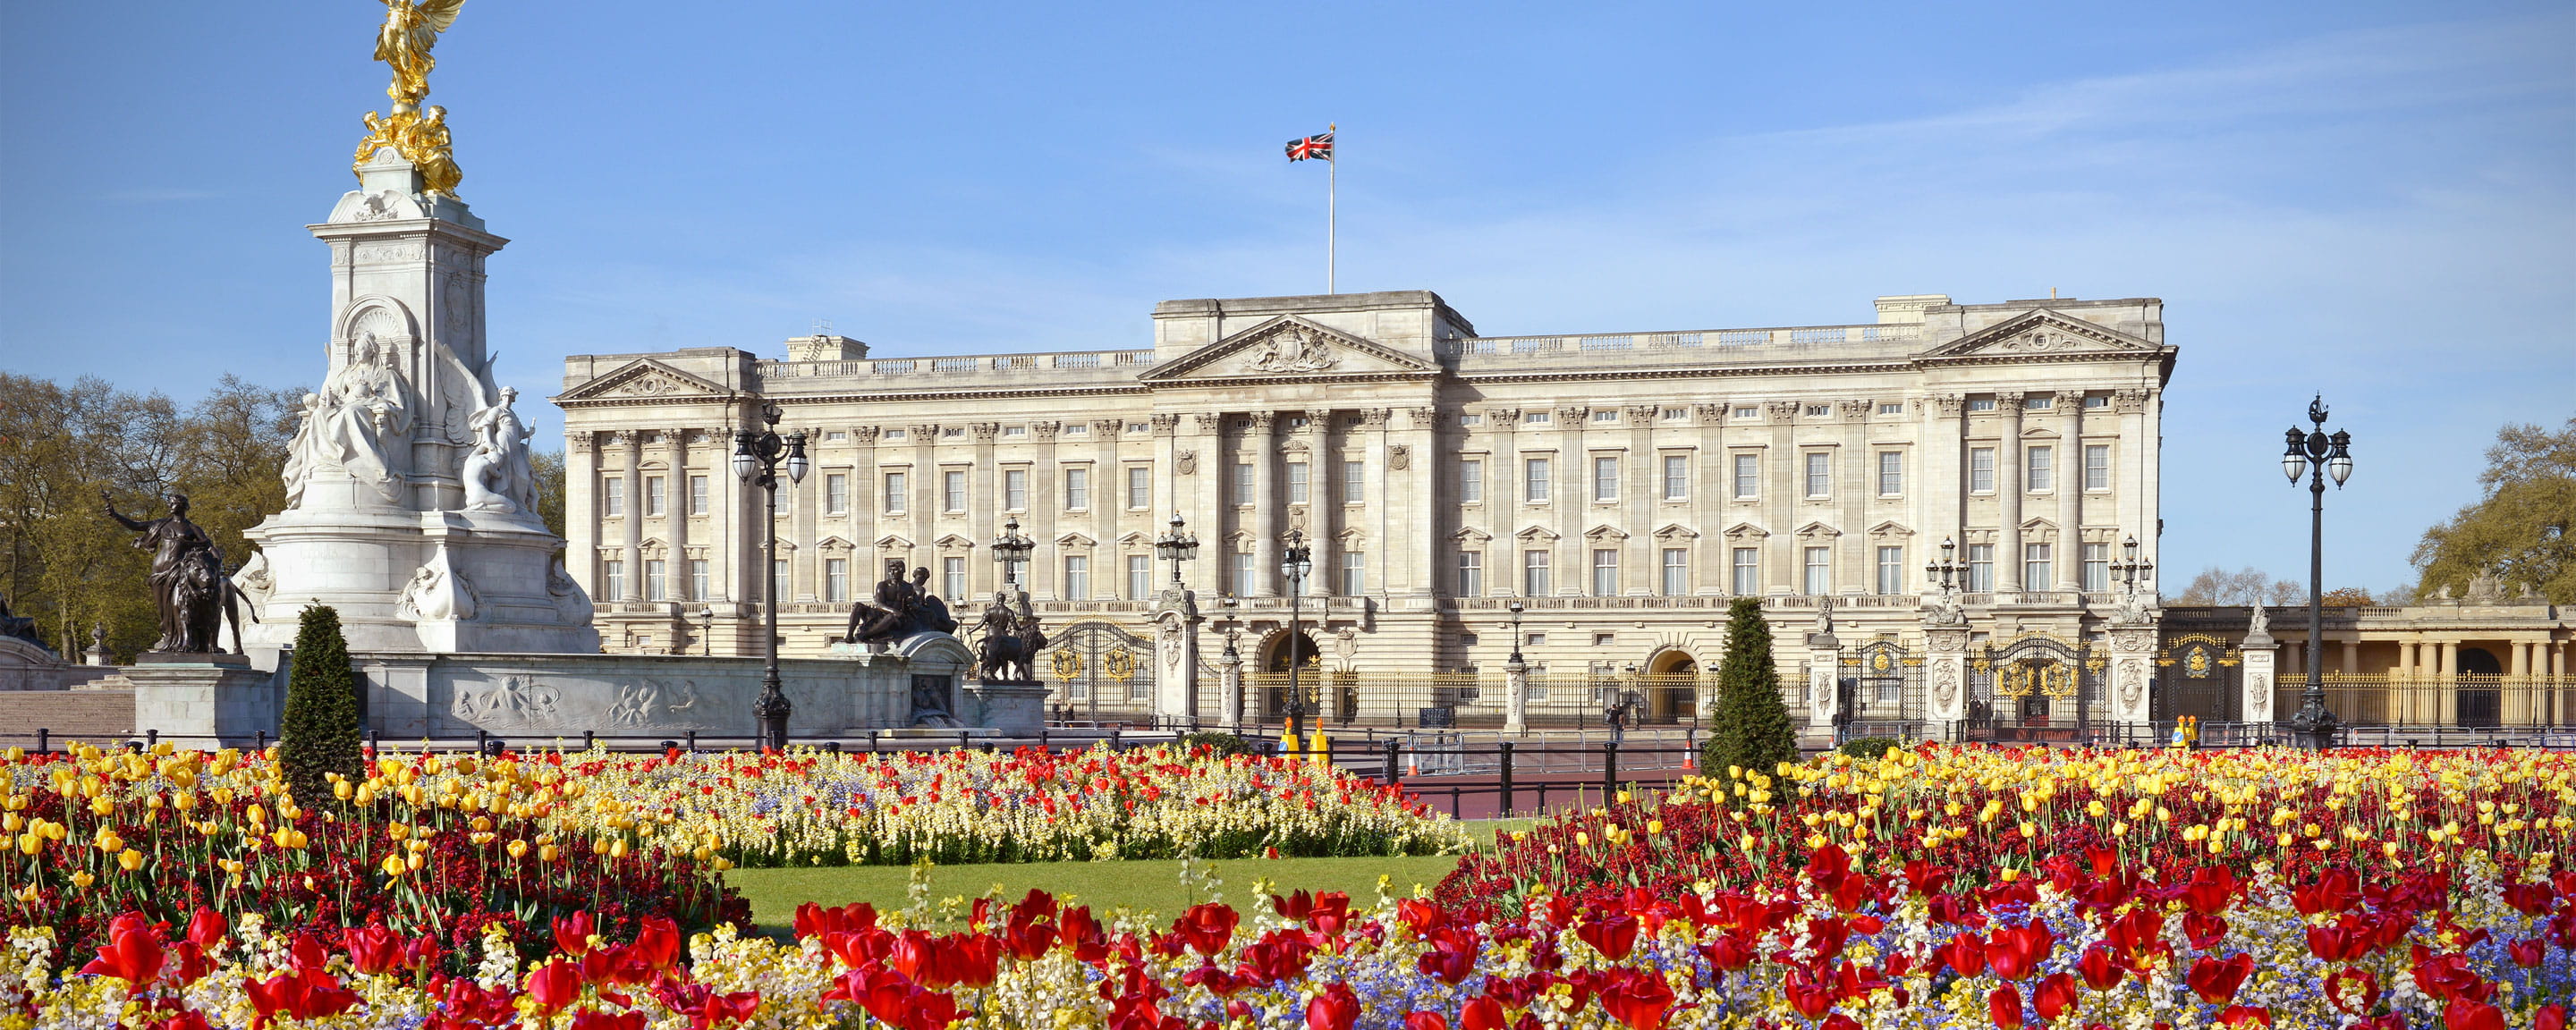 Buckingham Palace with bright flowers in the foreground 